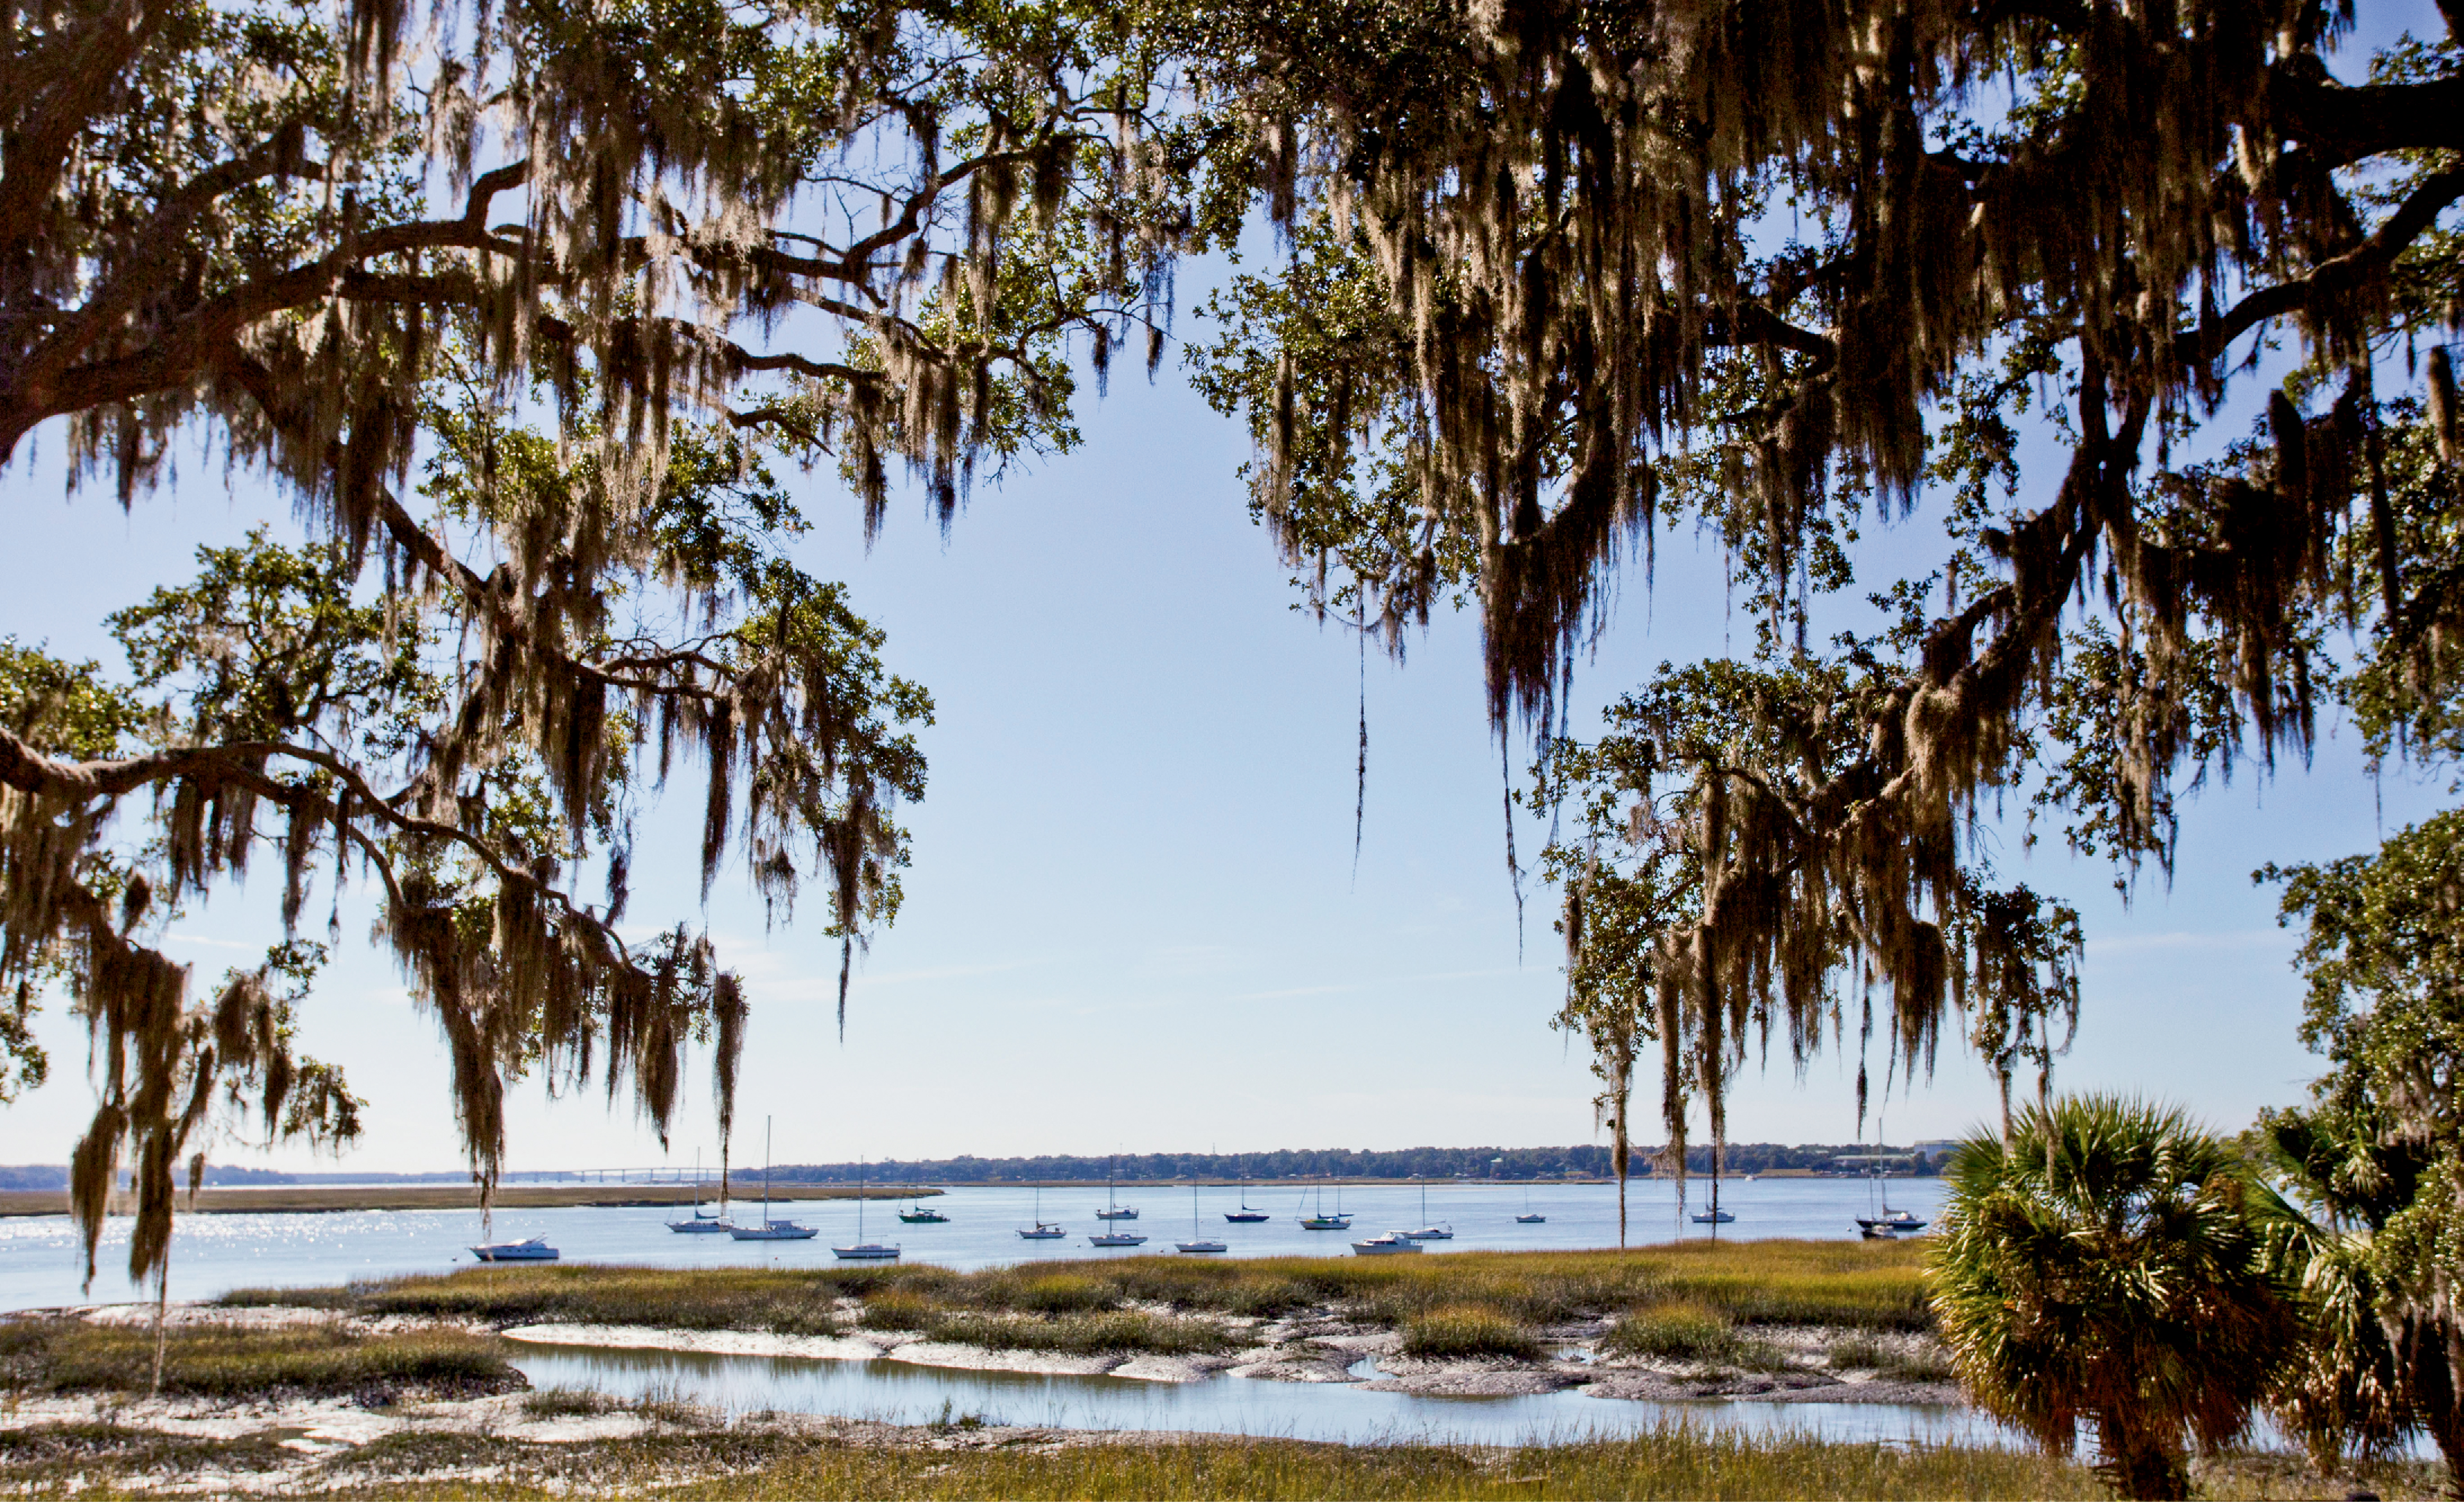 A Natural Harbor: The tidal Beaufort River as seen from Bay Street, looking toward Port Royal and Parris Island